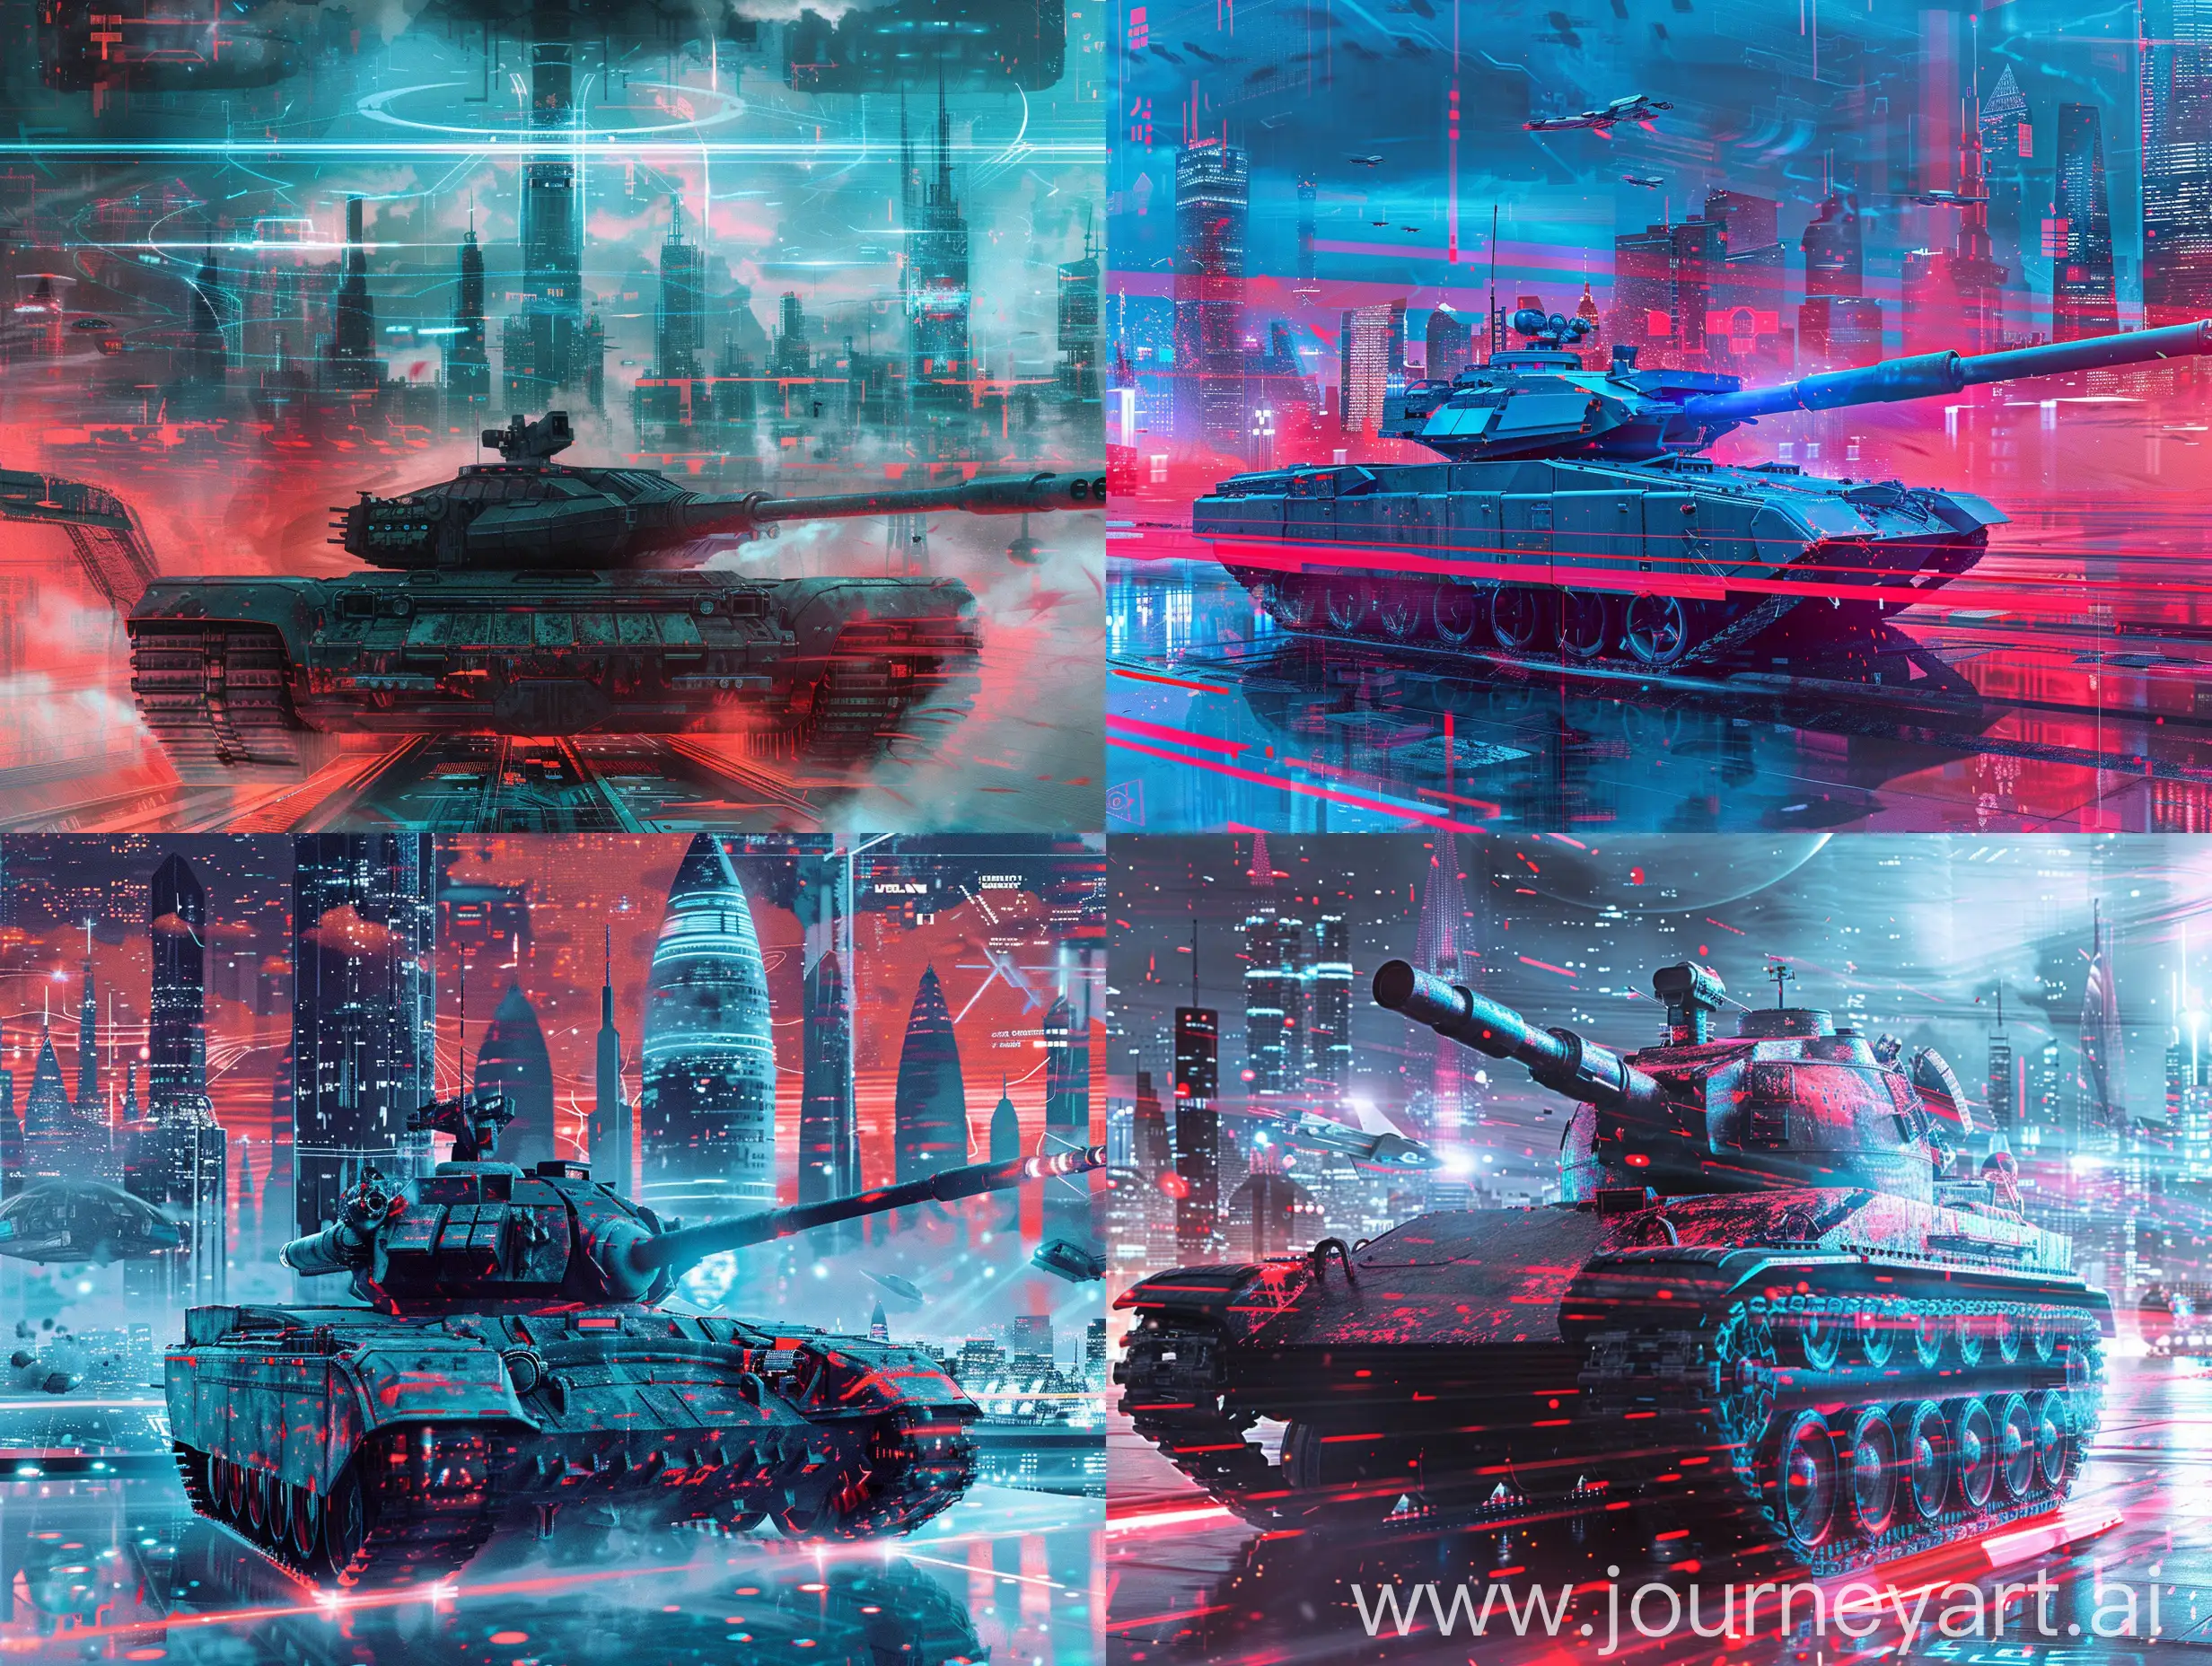 Futuristic-Holographic-Tank-in-Urban-Space-Environment